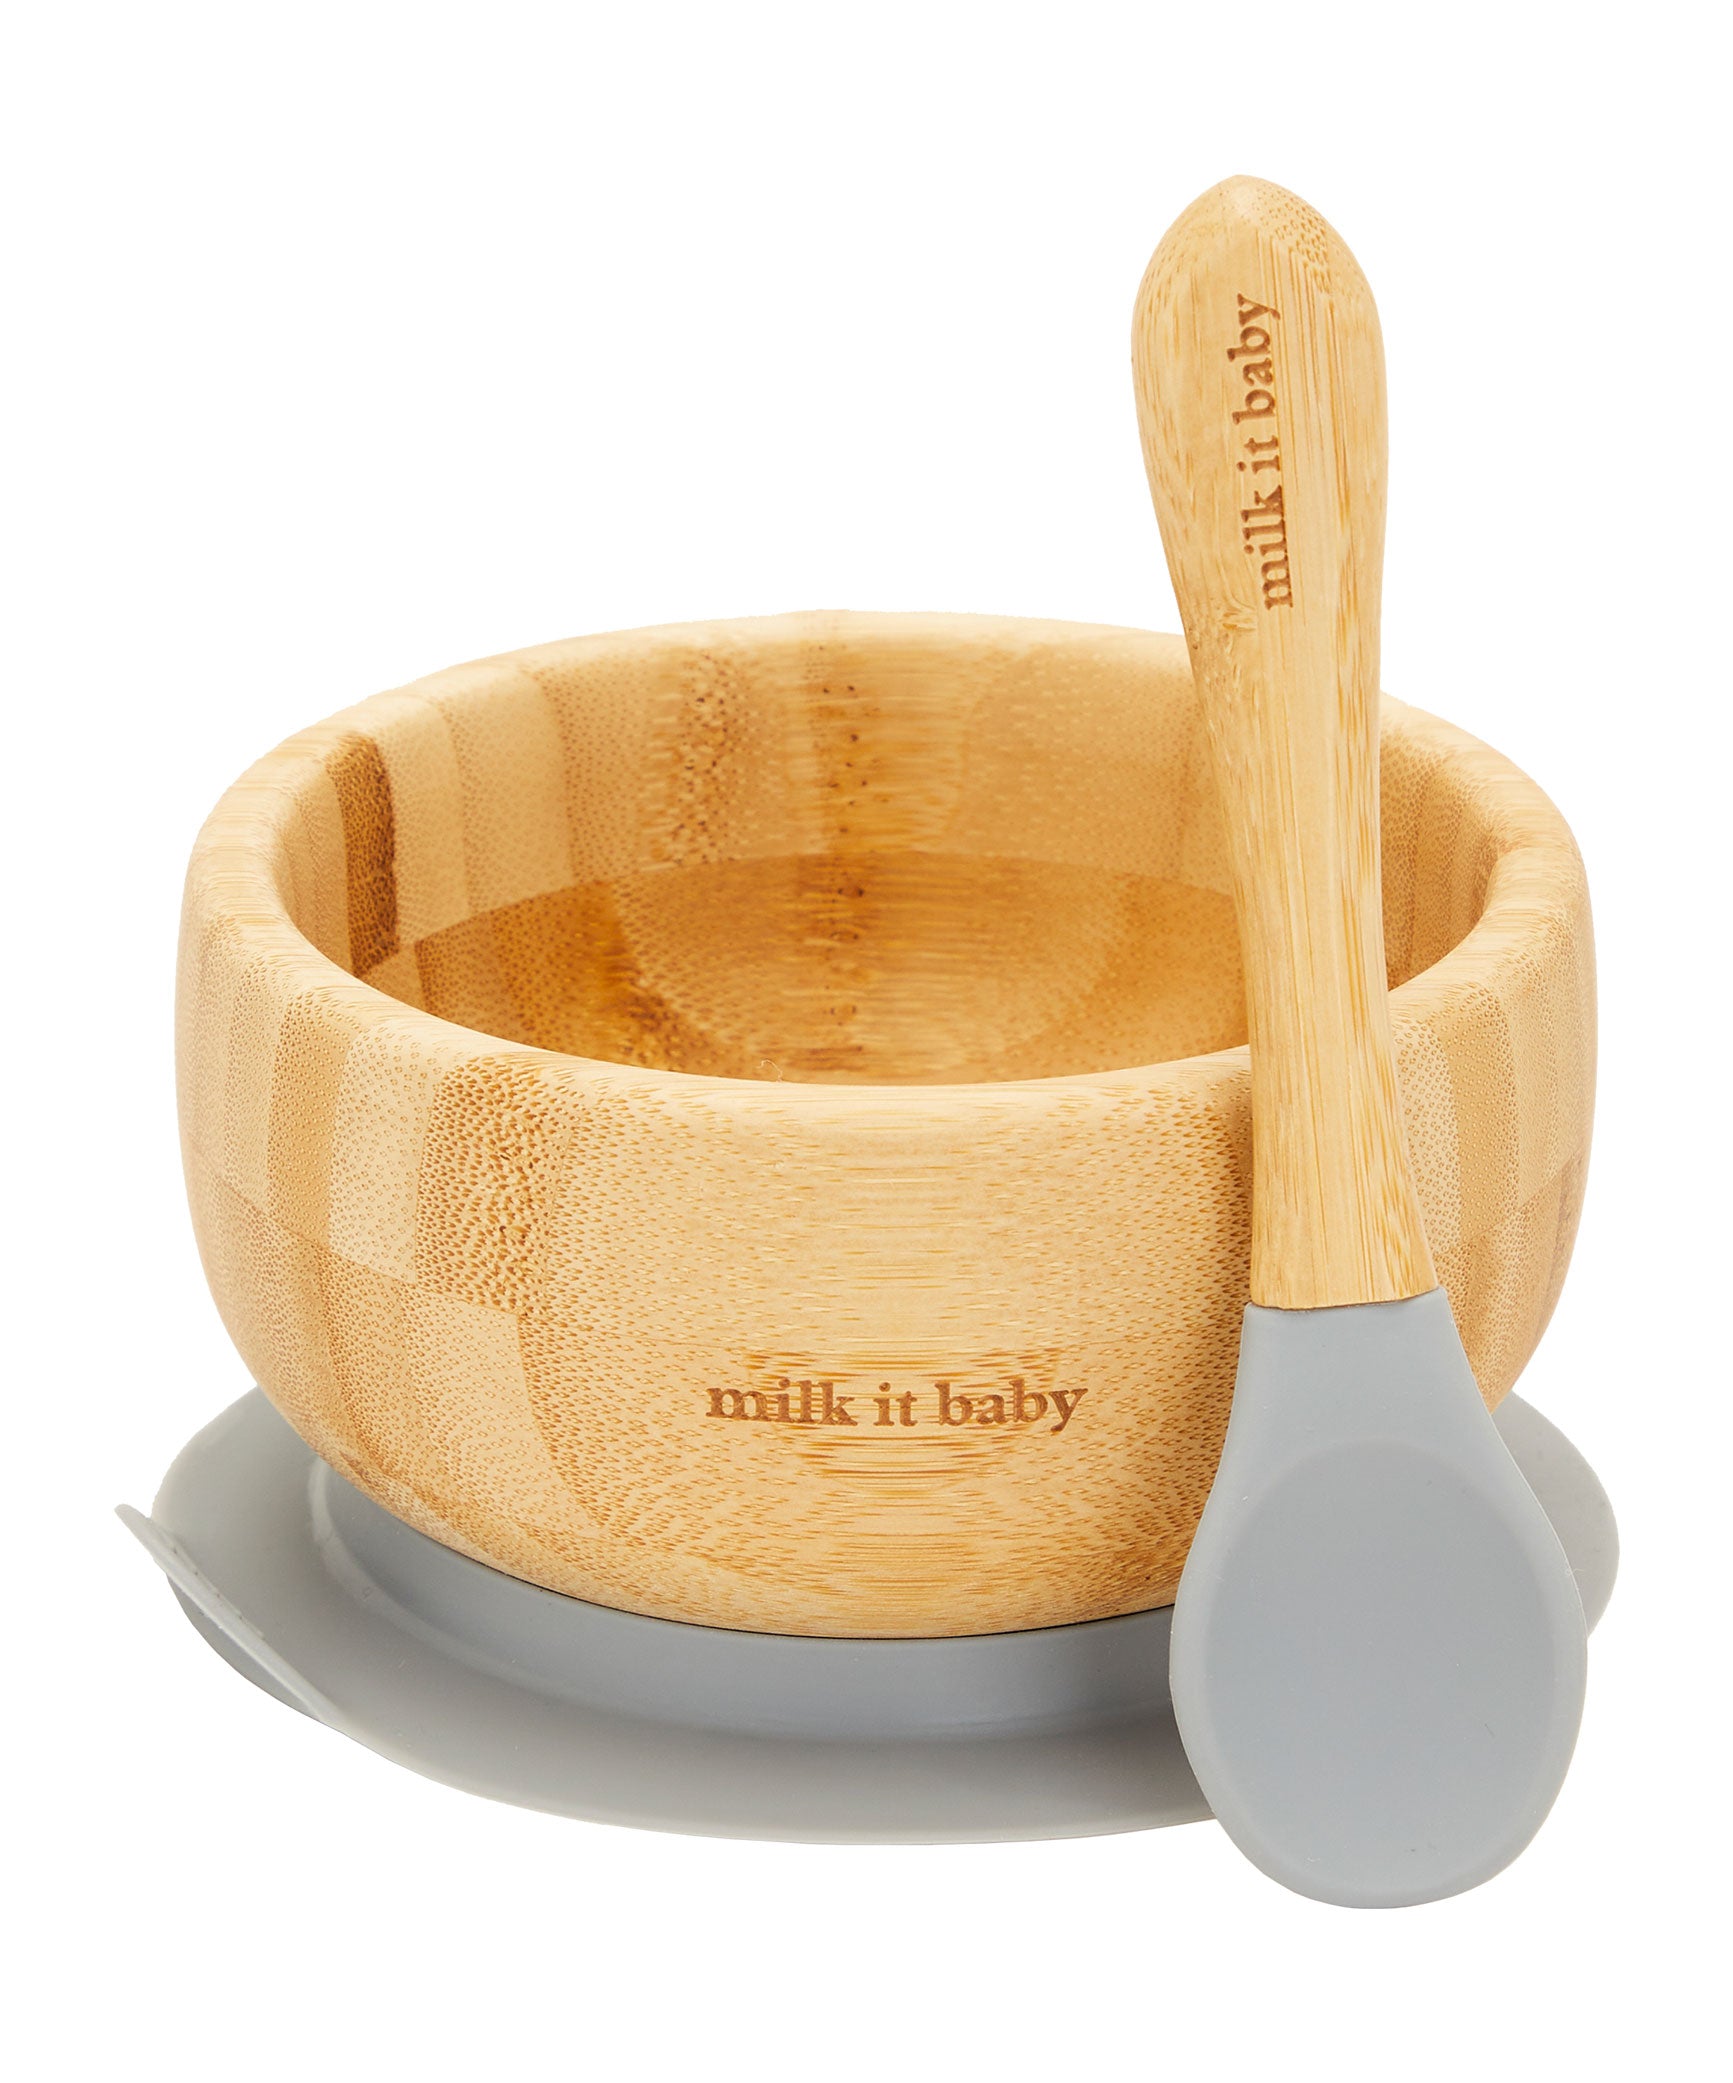 Milk It Baby, Bamboo Suction Baby Bowl & Spoon Set, Berry Blue, MI-BAMBBB003